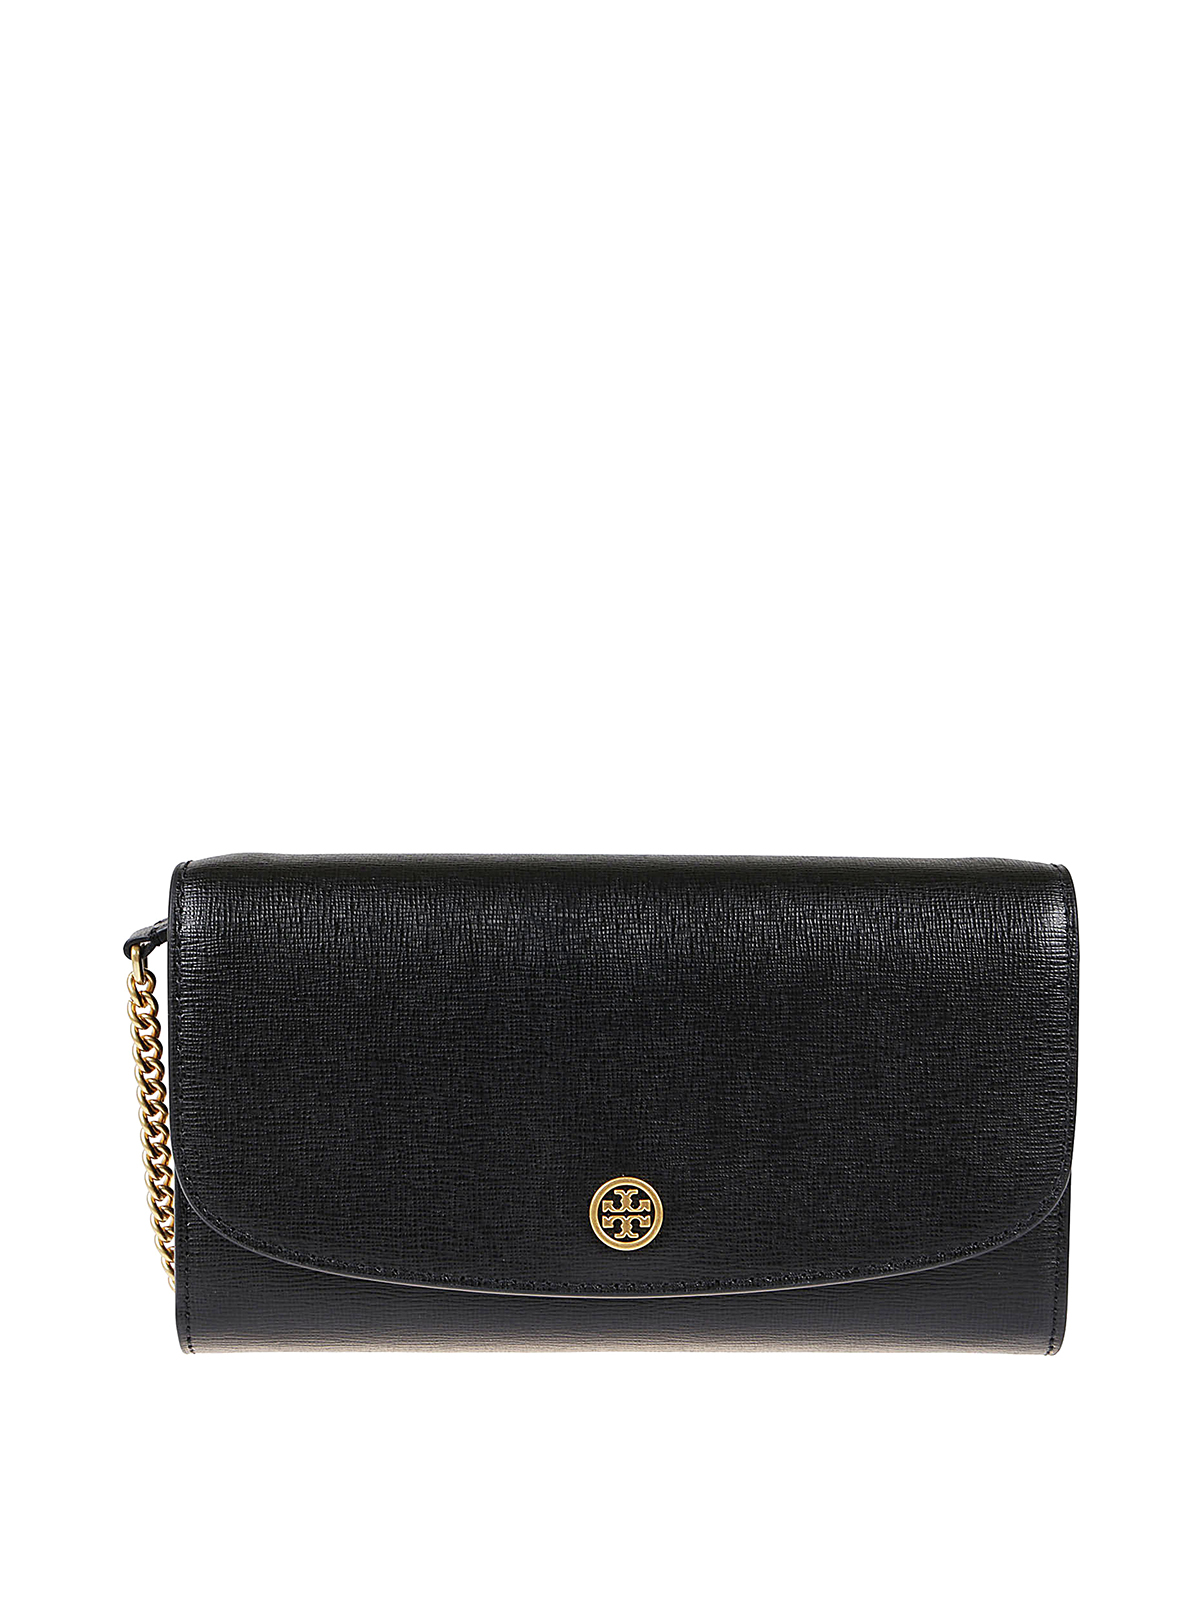 Tory Burch Robinson Chain Wallet In Negro